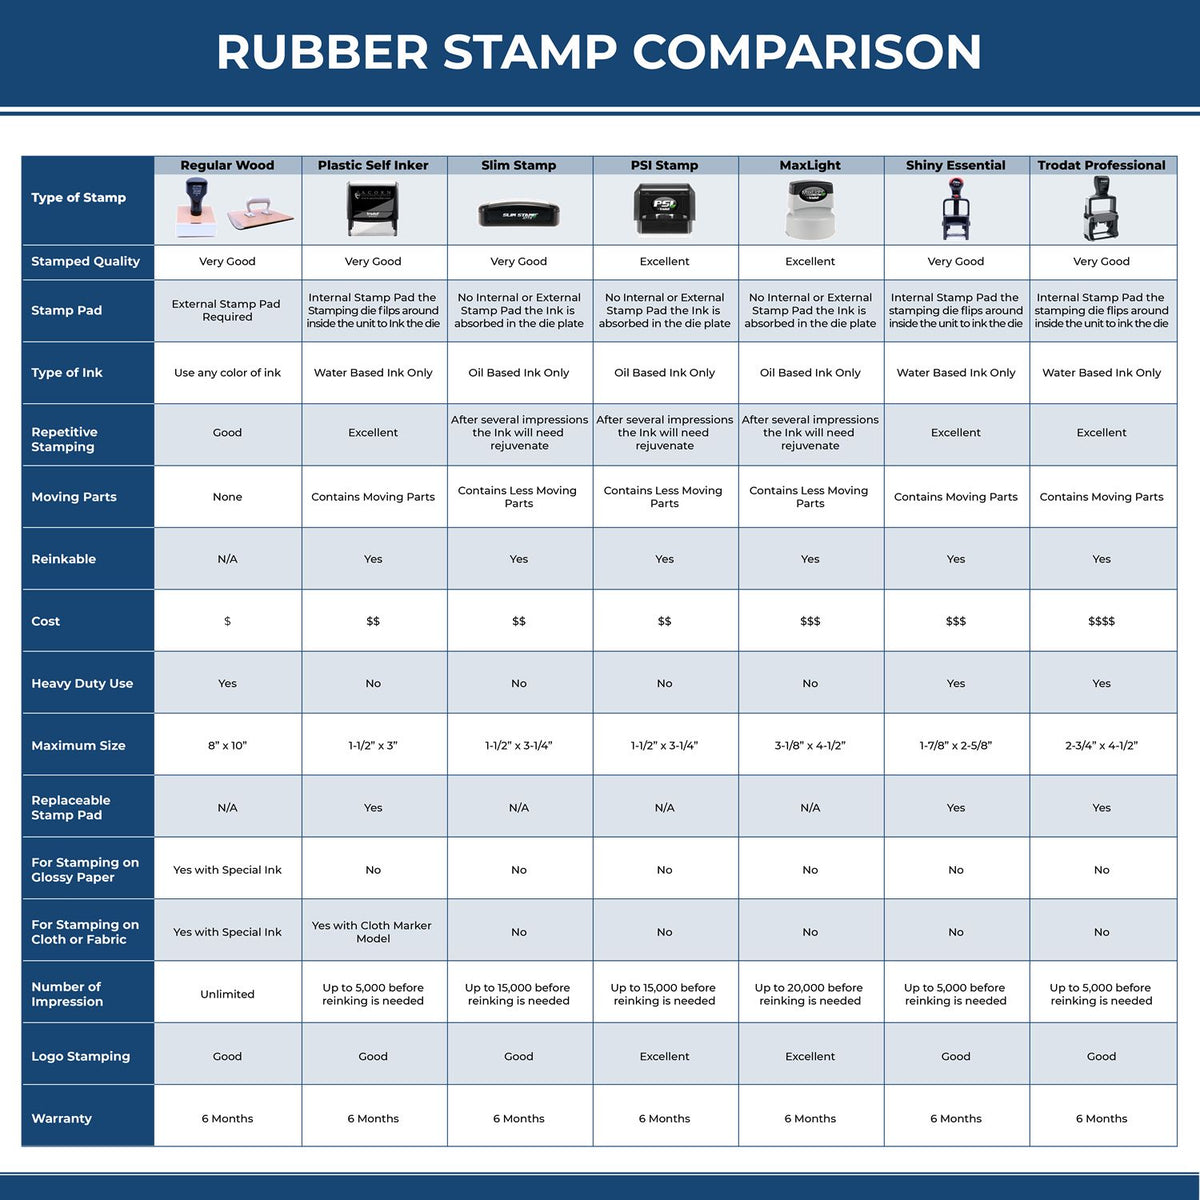 A comparison chart for the different types of mount models available for the Maryland Landscape Architectural Seal Stamp.